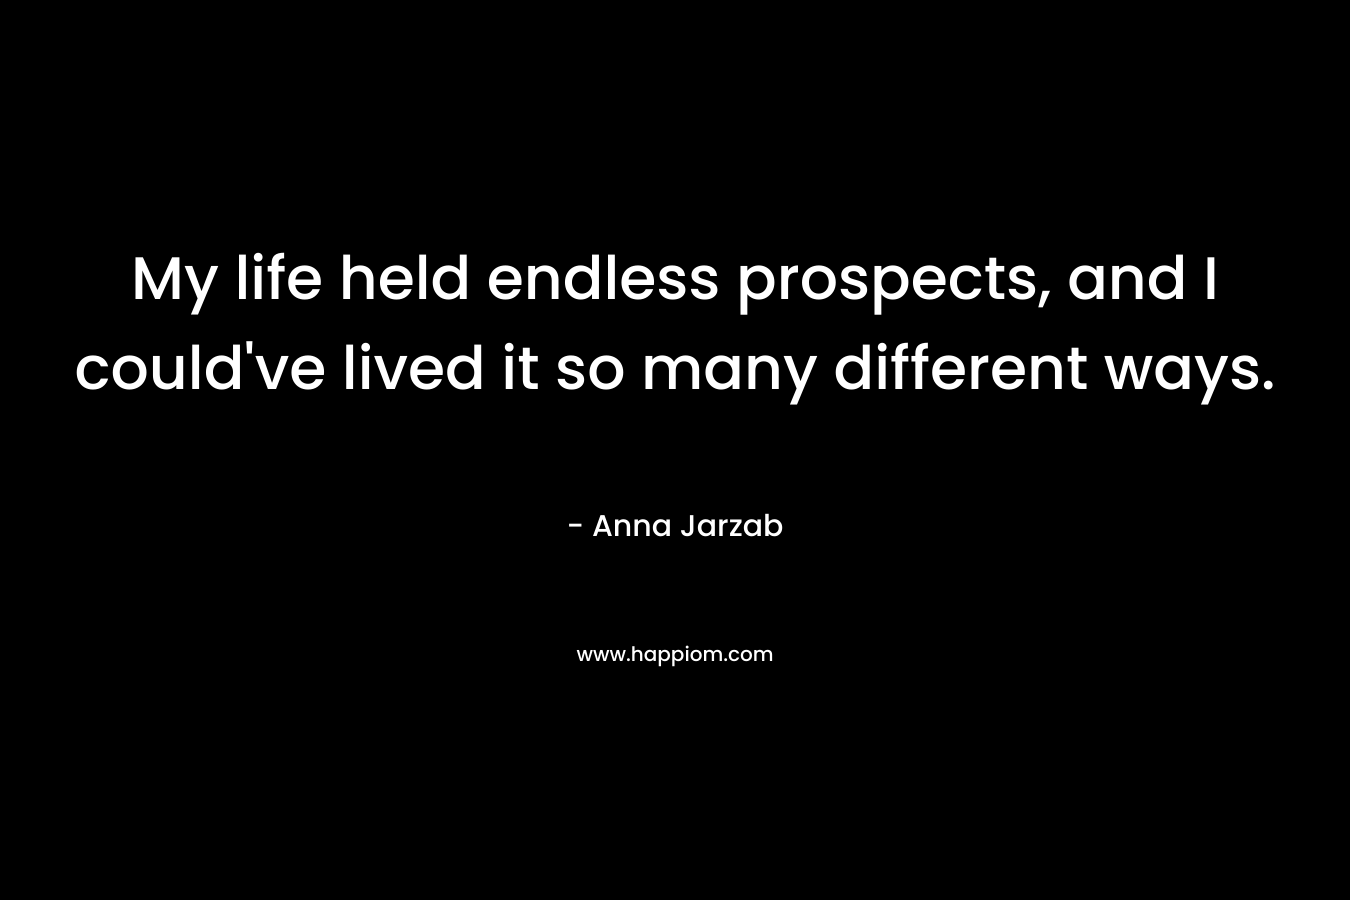 My life held endless prospects, and I could’ve lived it so many different ways. – Anna Jarzab